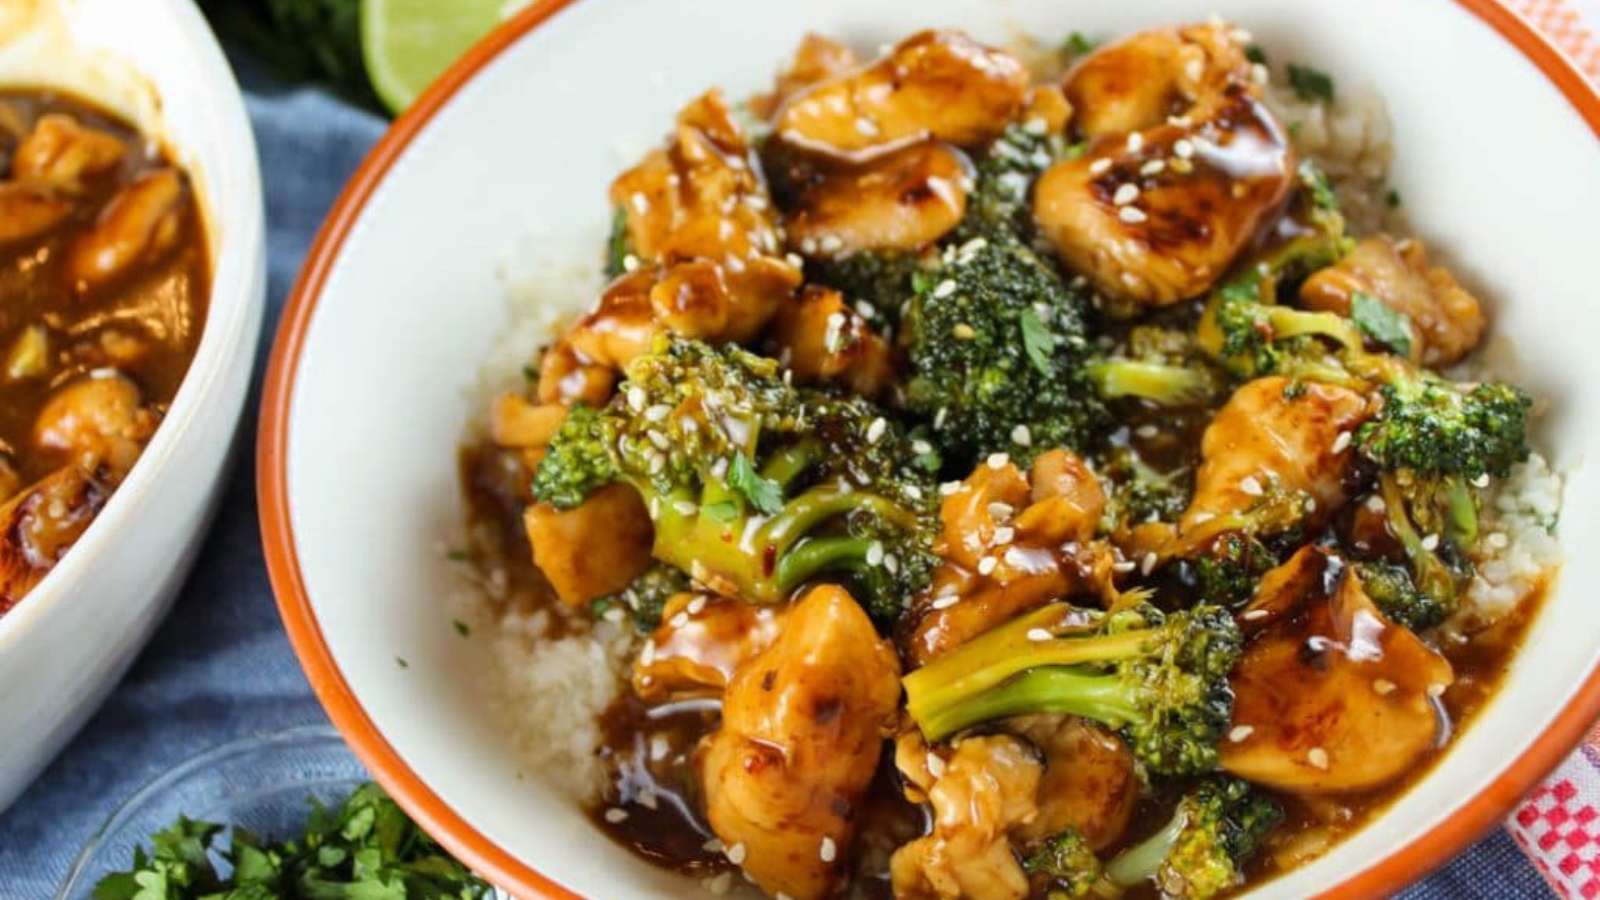 A bowl of chicken and broccoli in a sauce.